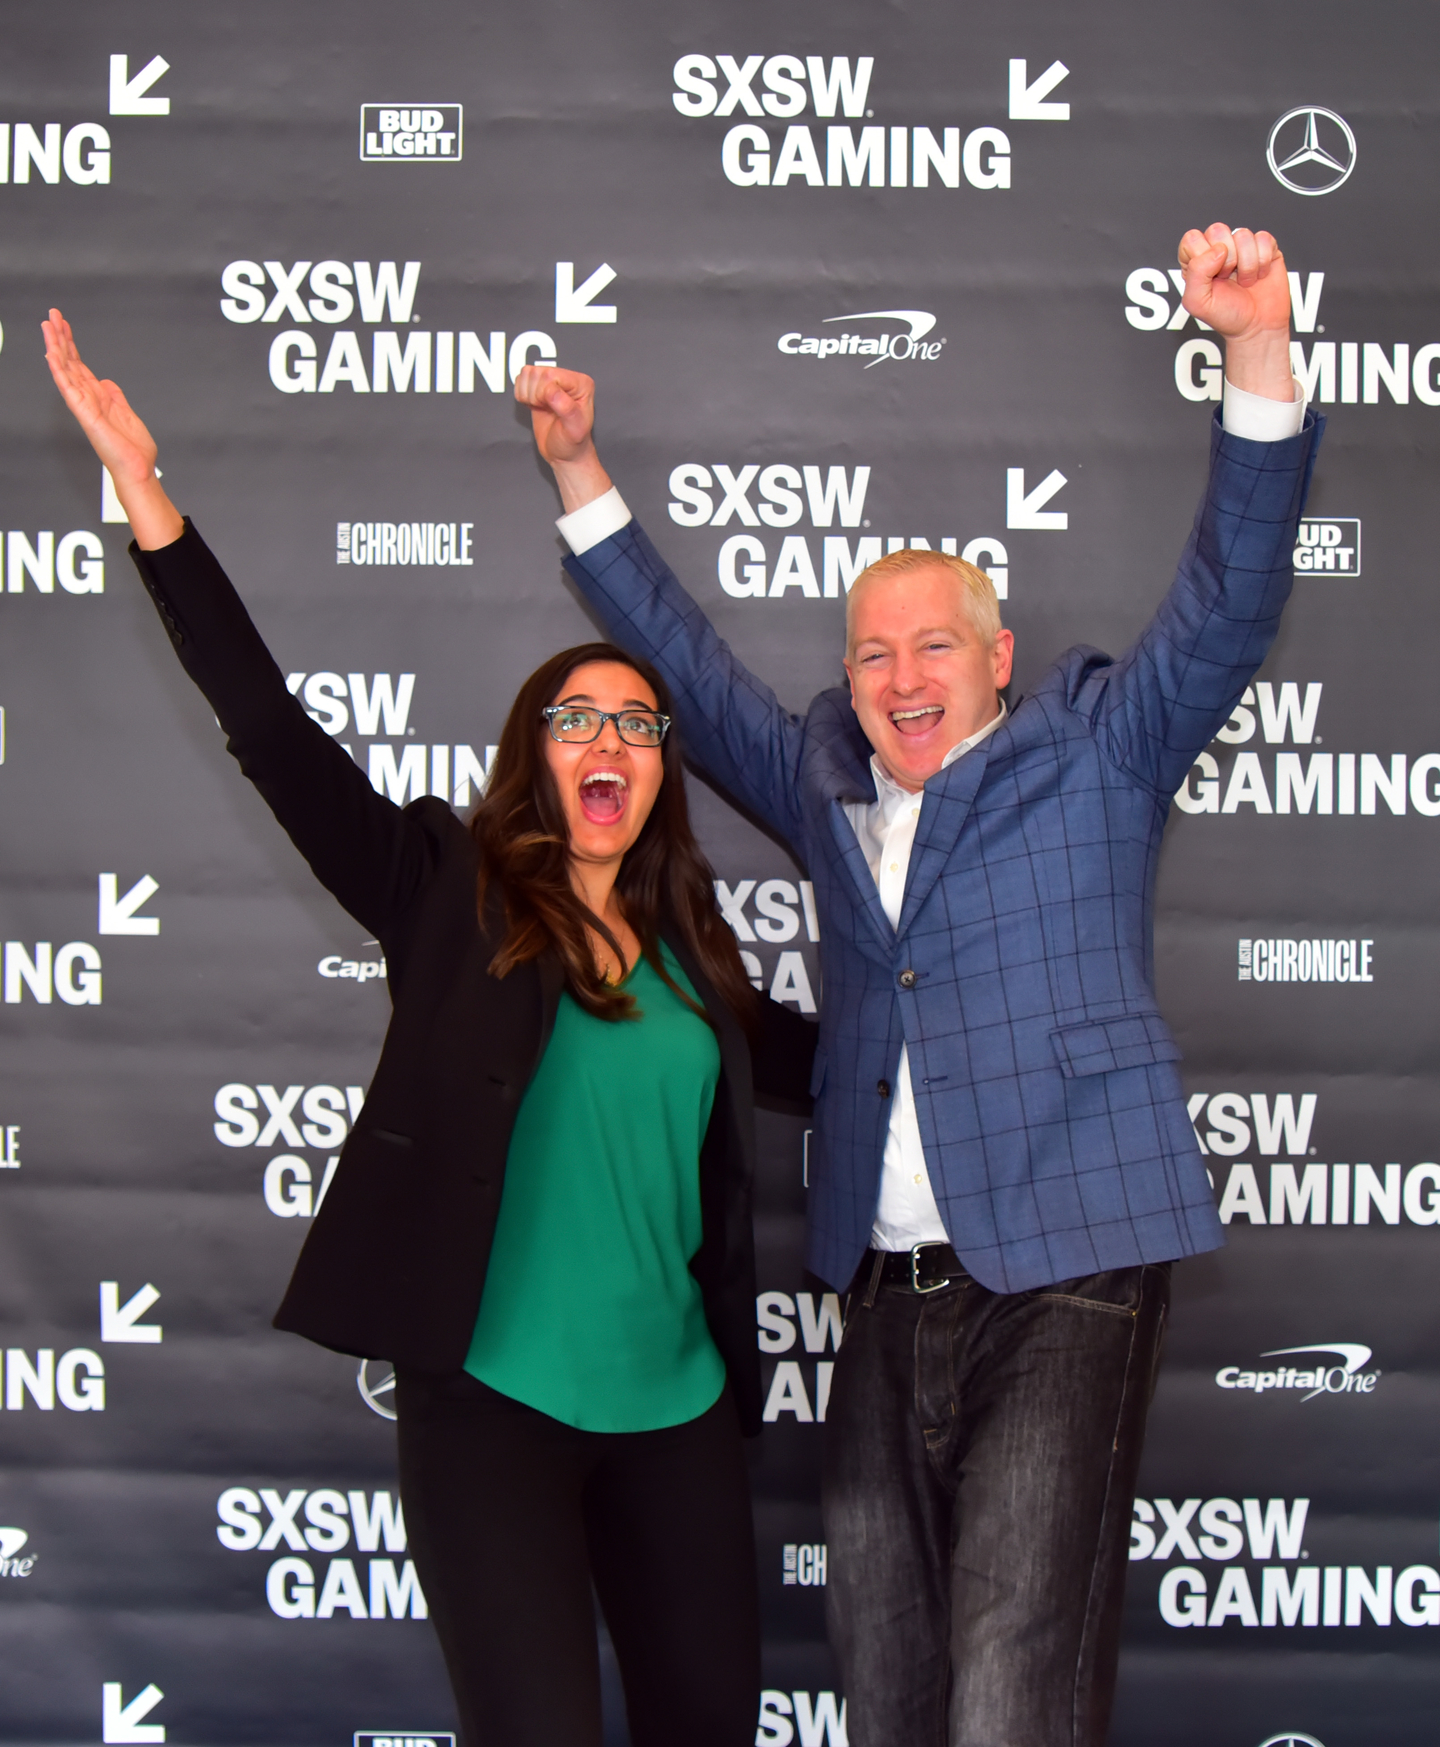 Saira Mueller and Brendan Donohue were part of the “Hoops and Gaming: Why the NBA Started an Esports League” session on Friday. Photo by Jason Bollenbacher/Getty Images for SXSW